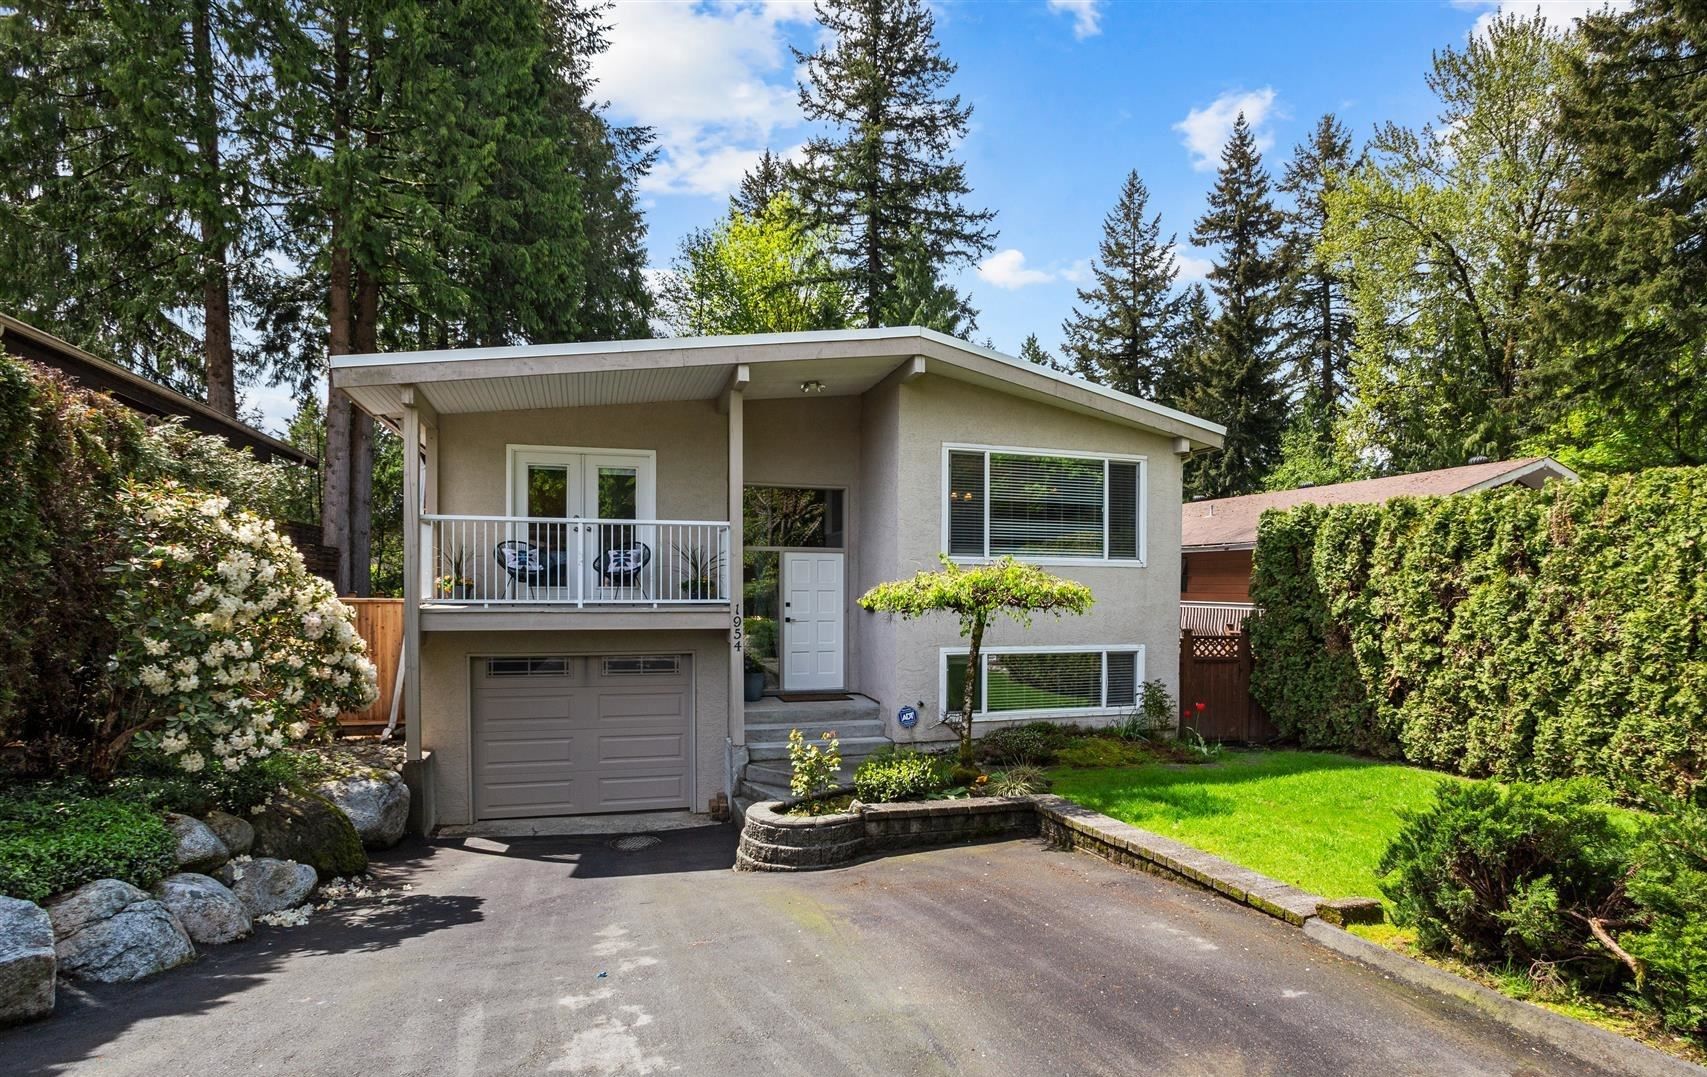 The Thornton Group has just listed ANOTHER home in Central Coquitlam, Coquitlam